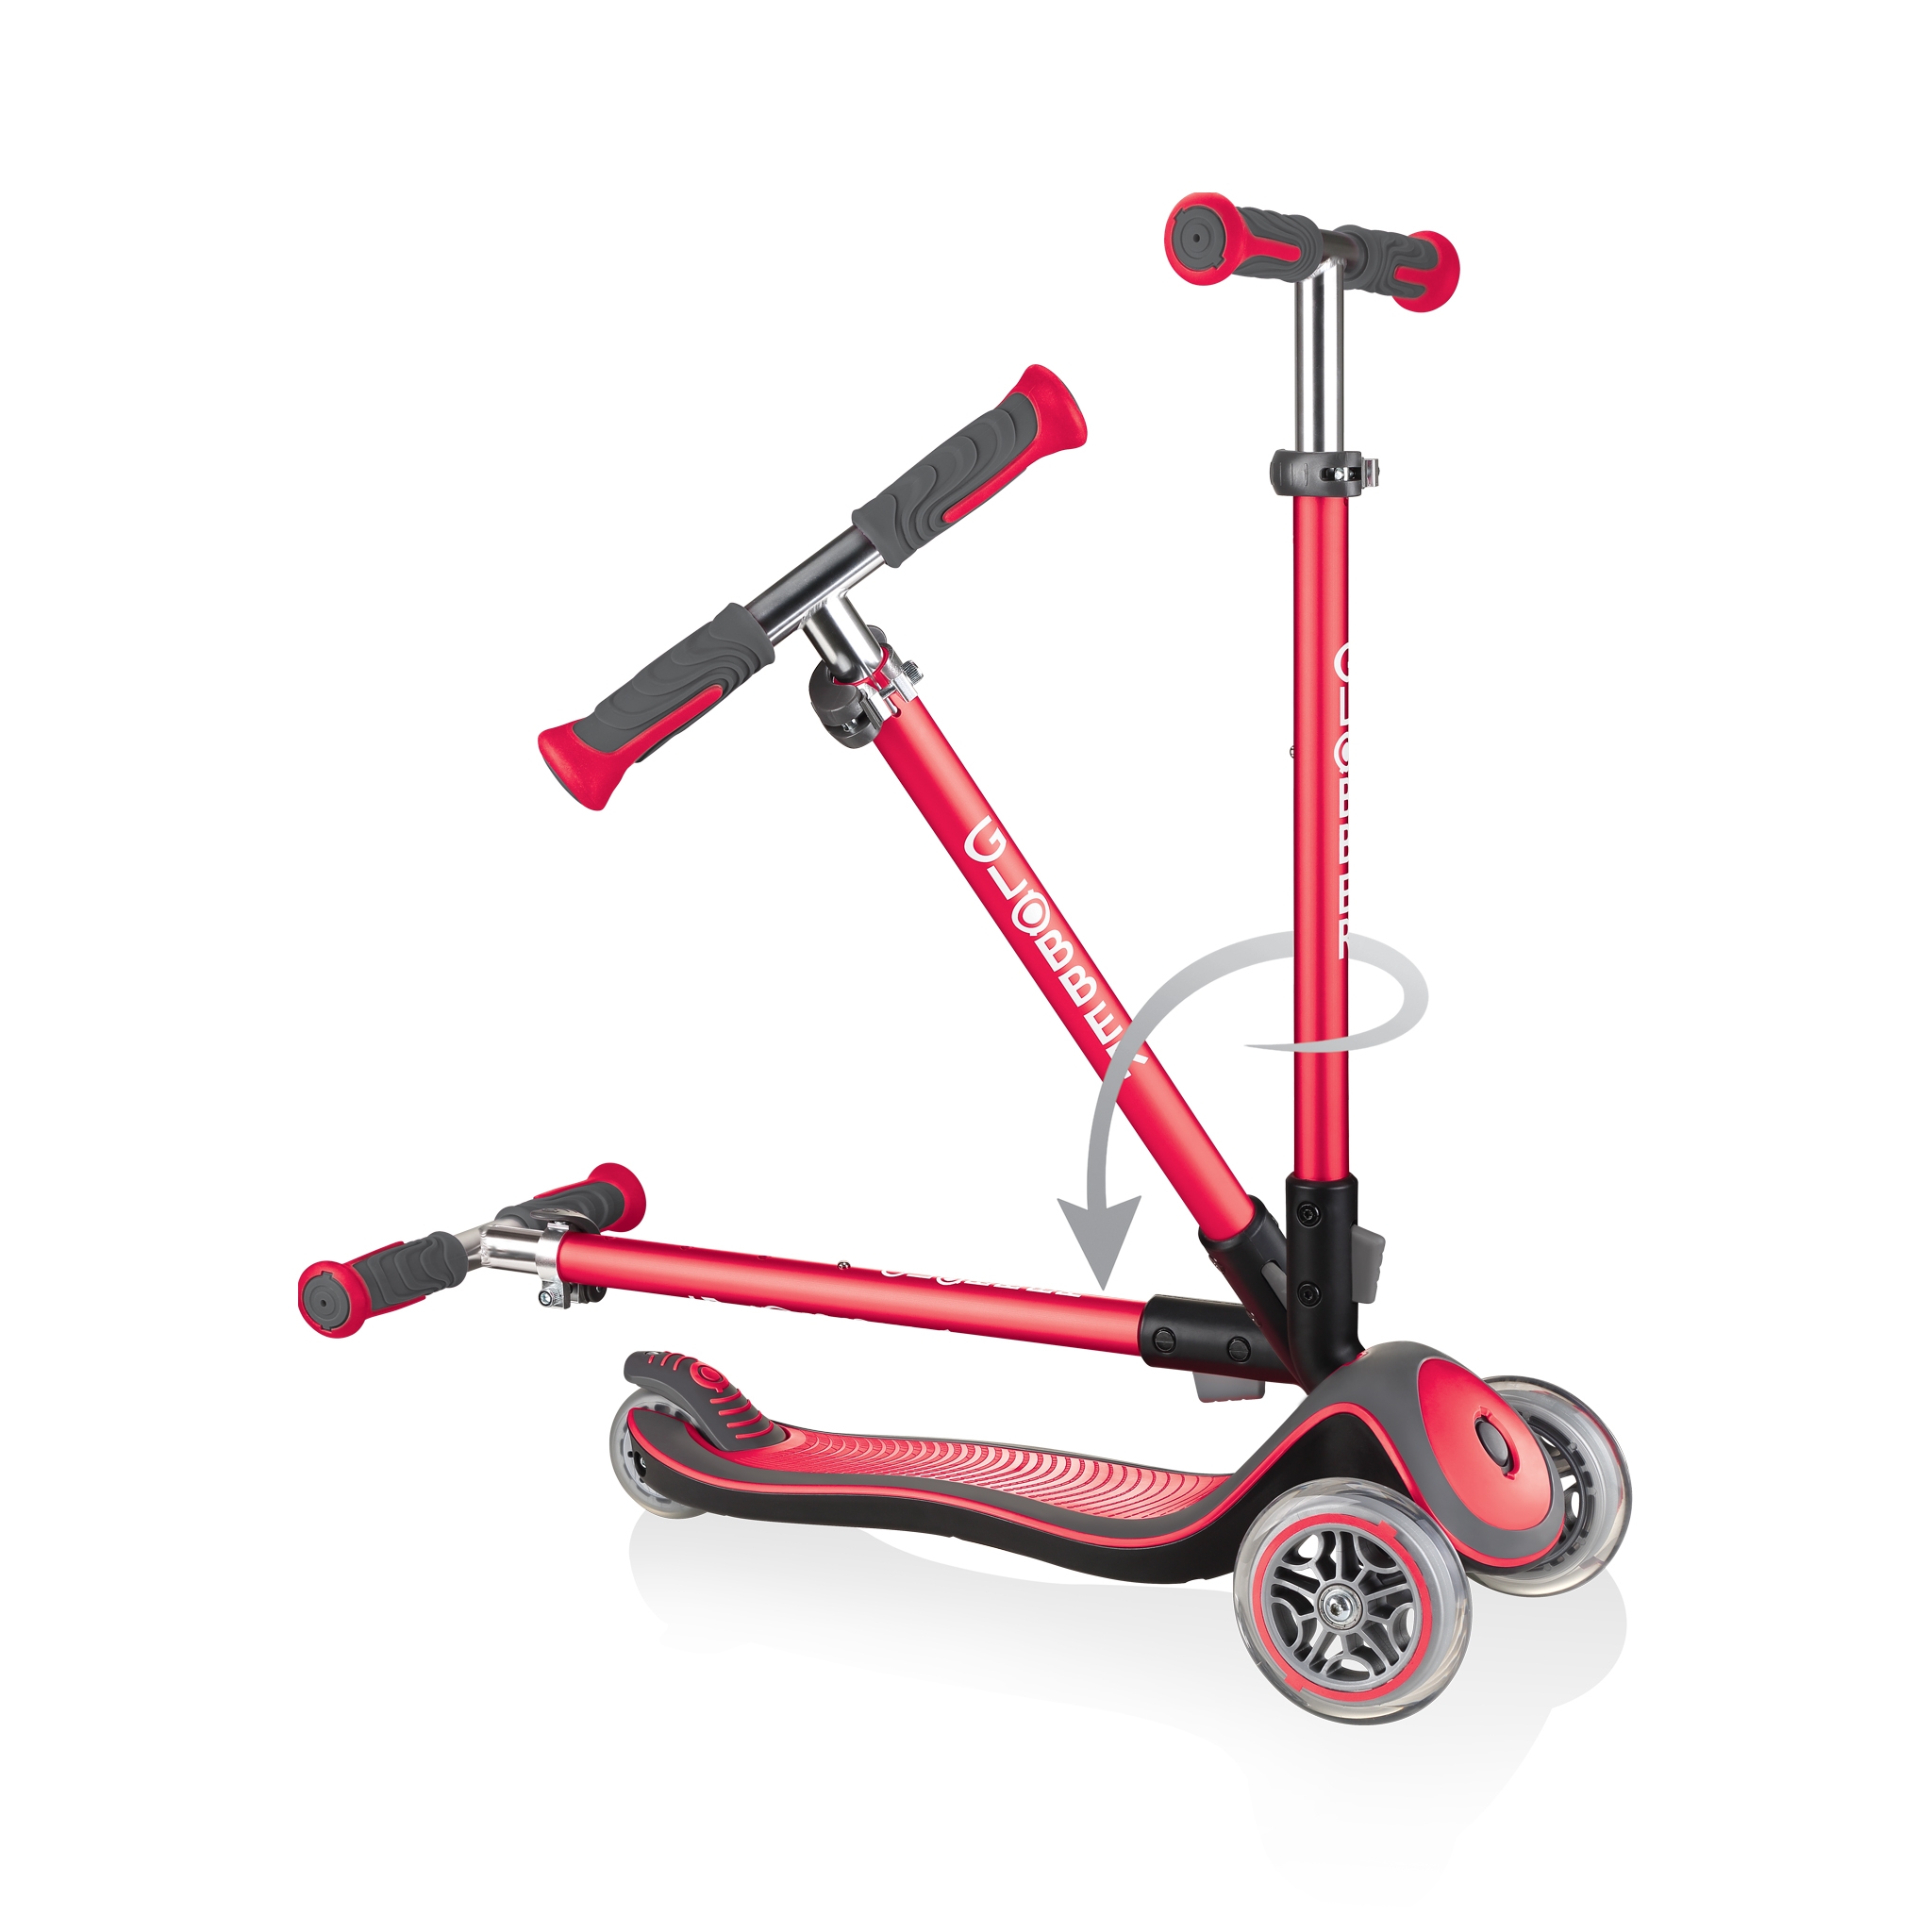 Globber-ELITE-DELUXE-3-wheel-fold-up-scooter-for-kids-new-red 2